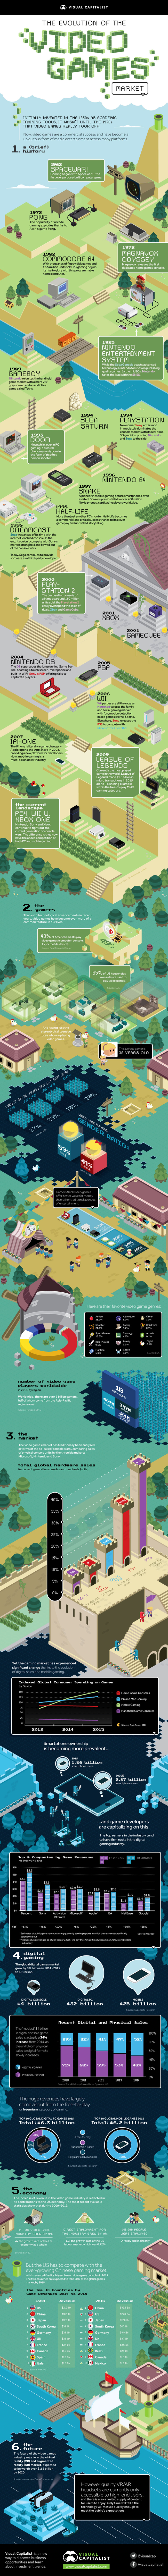 History of the Video Game Industry Infographic